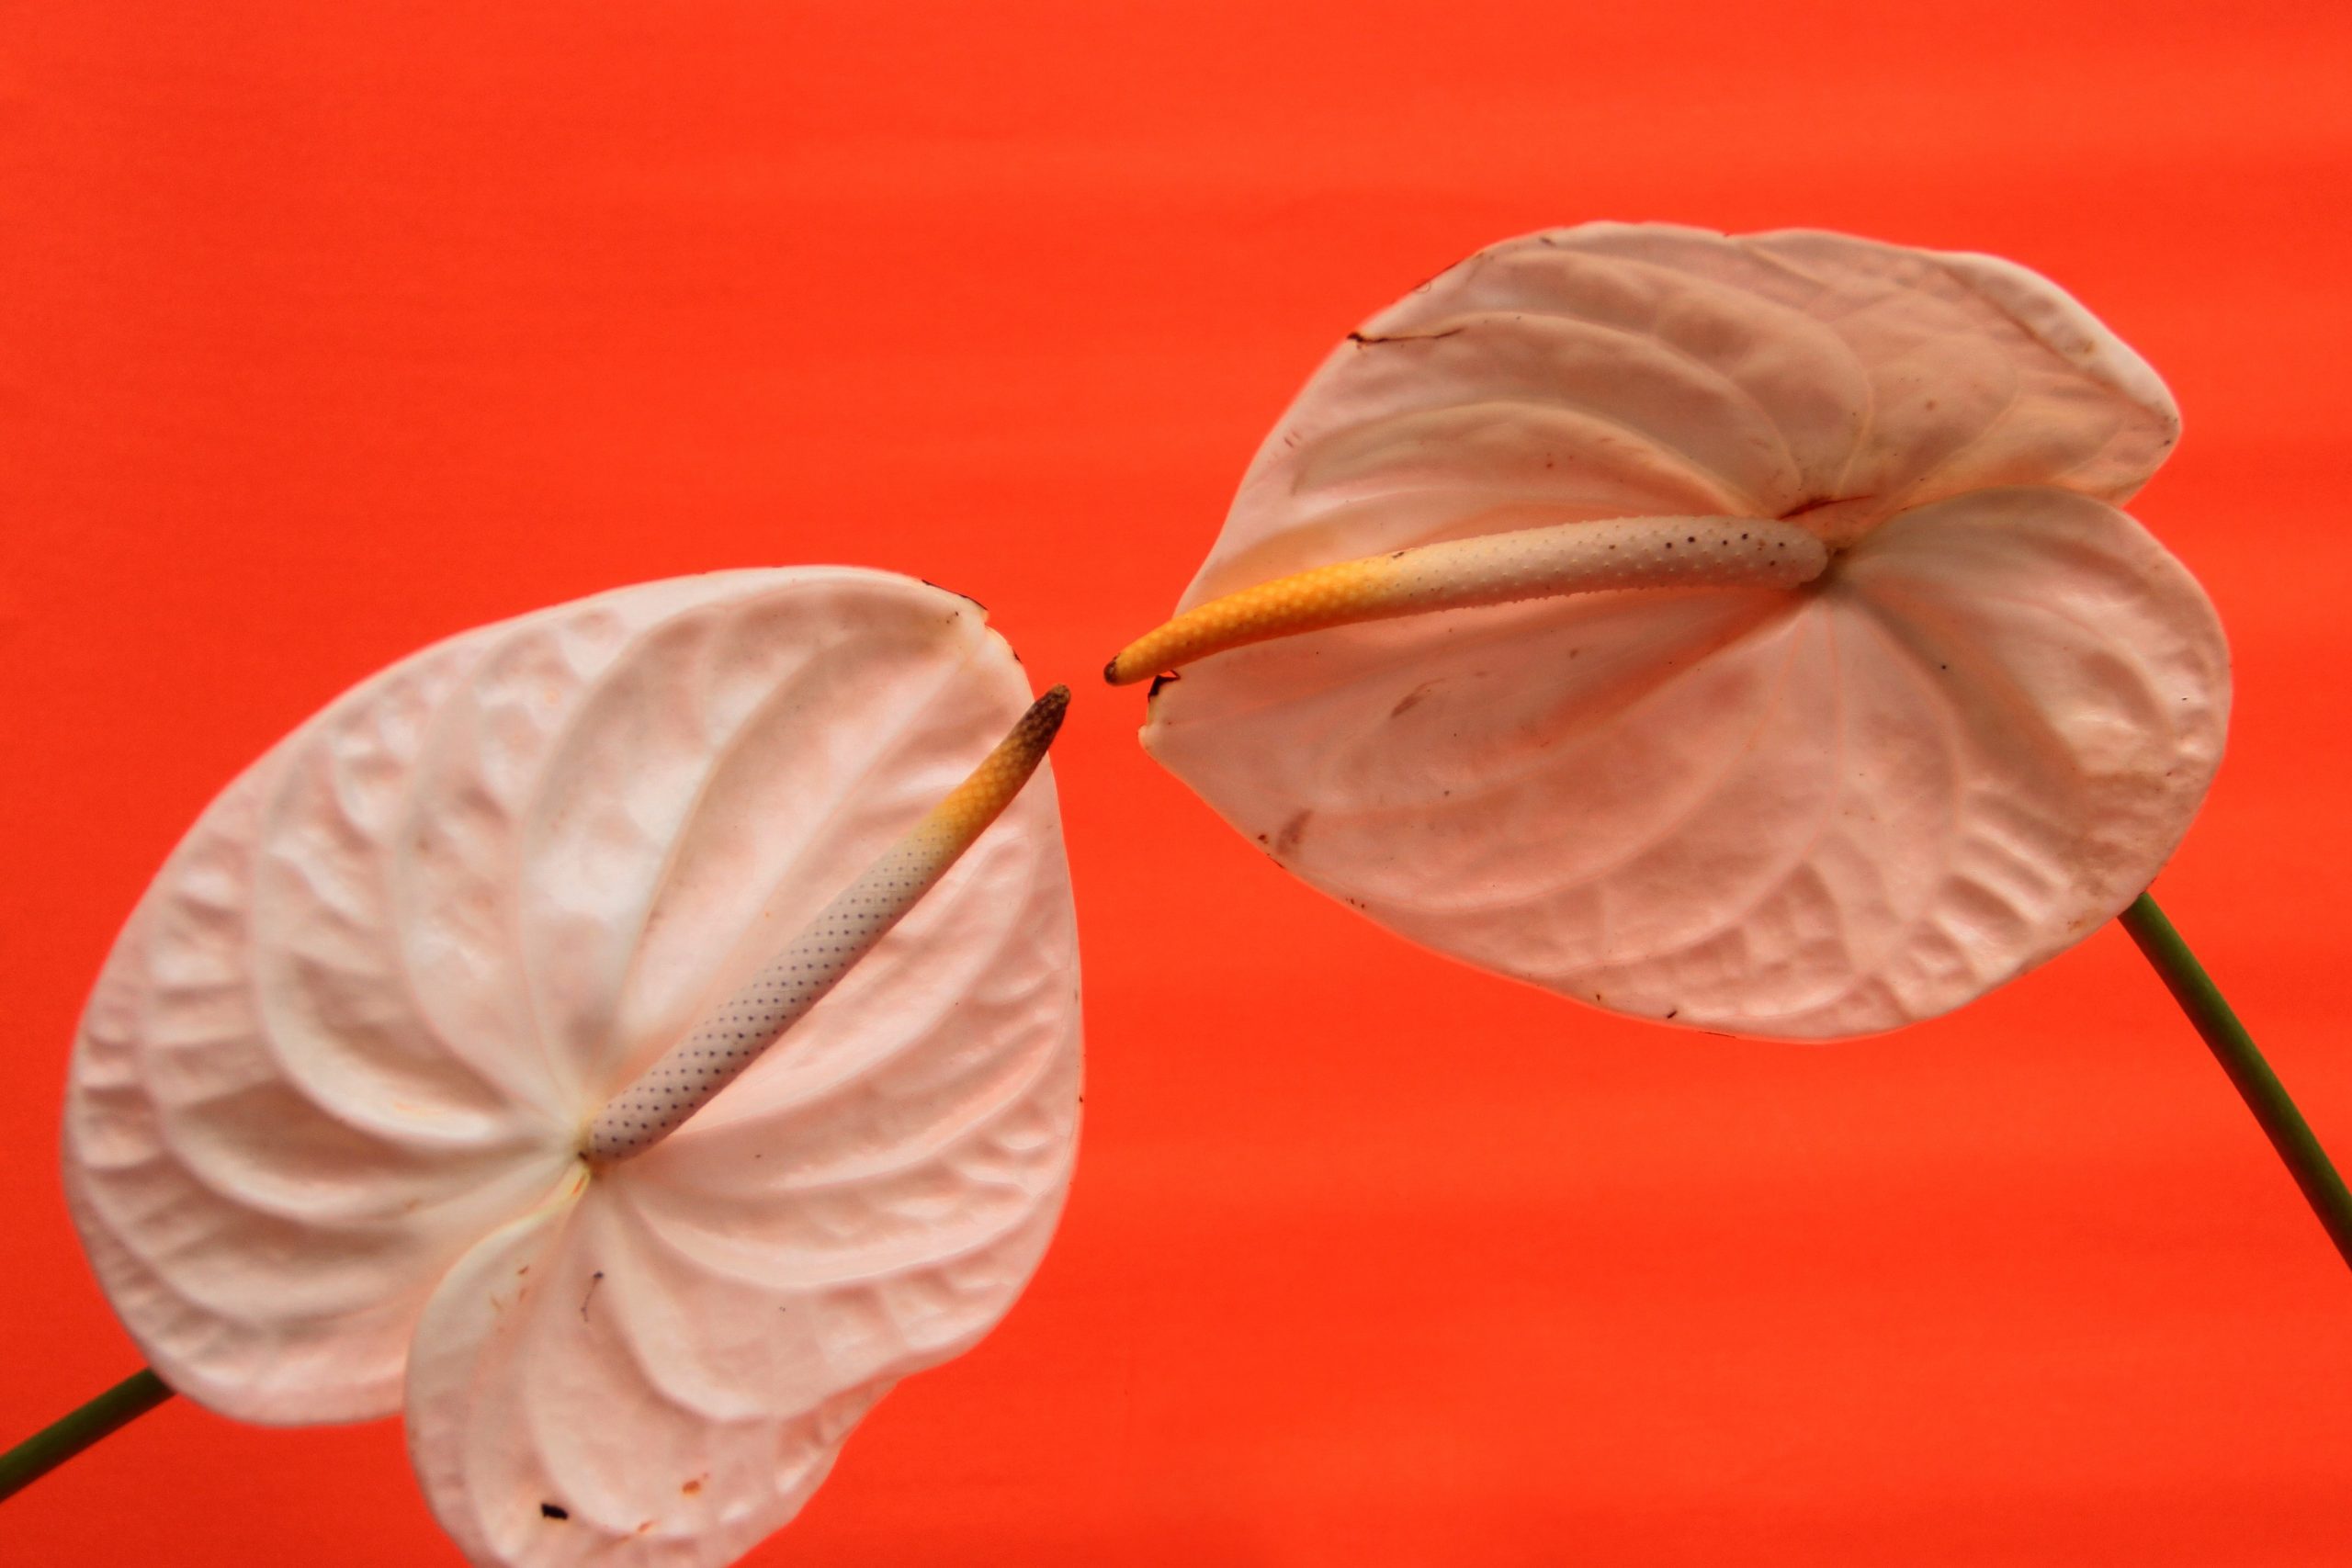 white and brown flower petals on red background